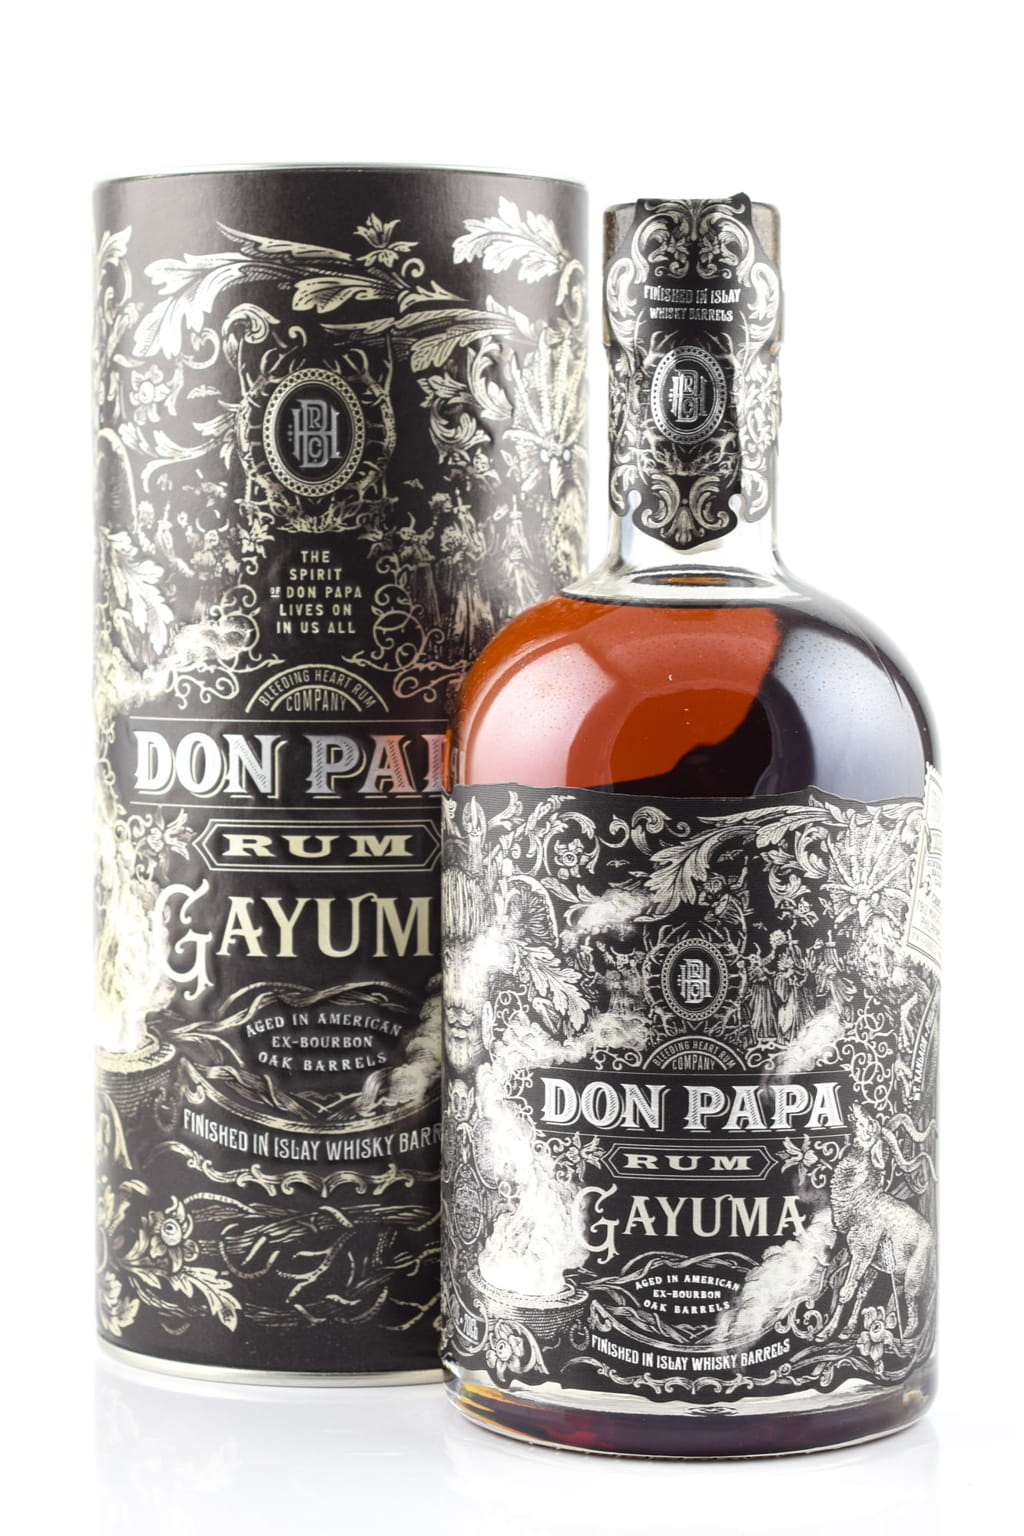 ᐅ Don Papa Gayuma Home of online buy now edition the Malts - - | special